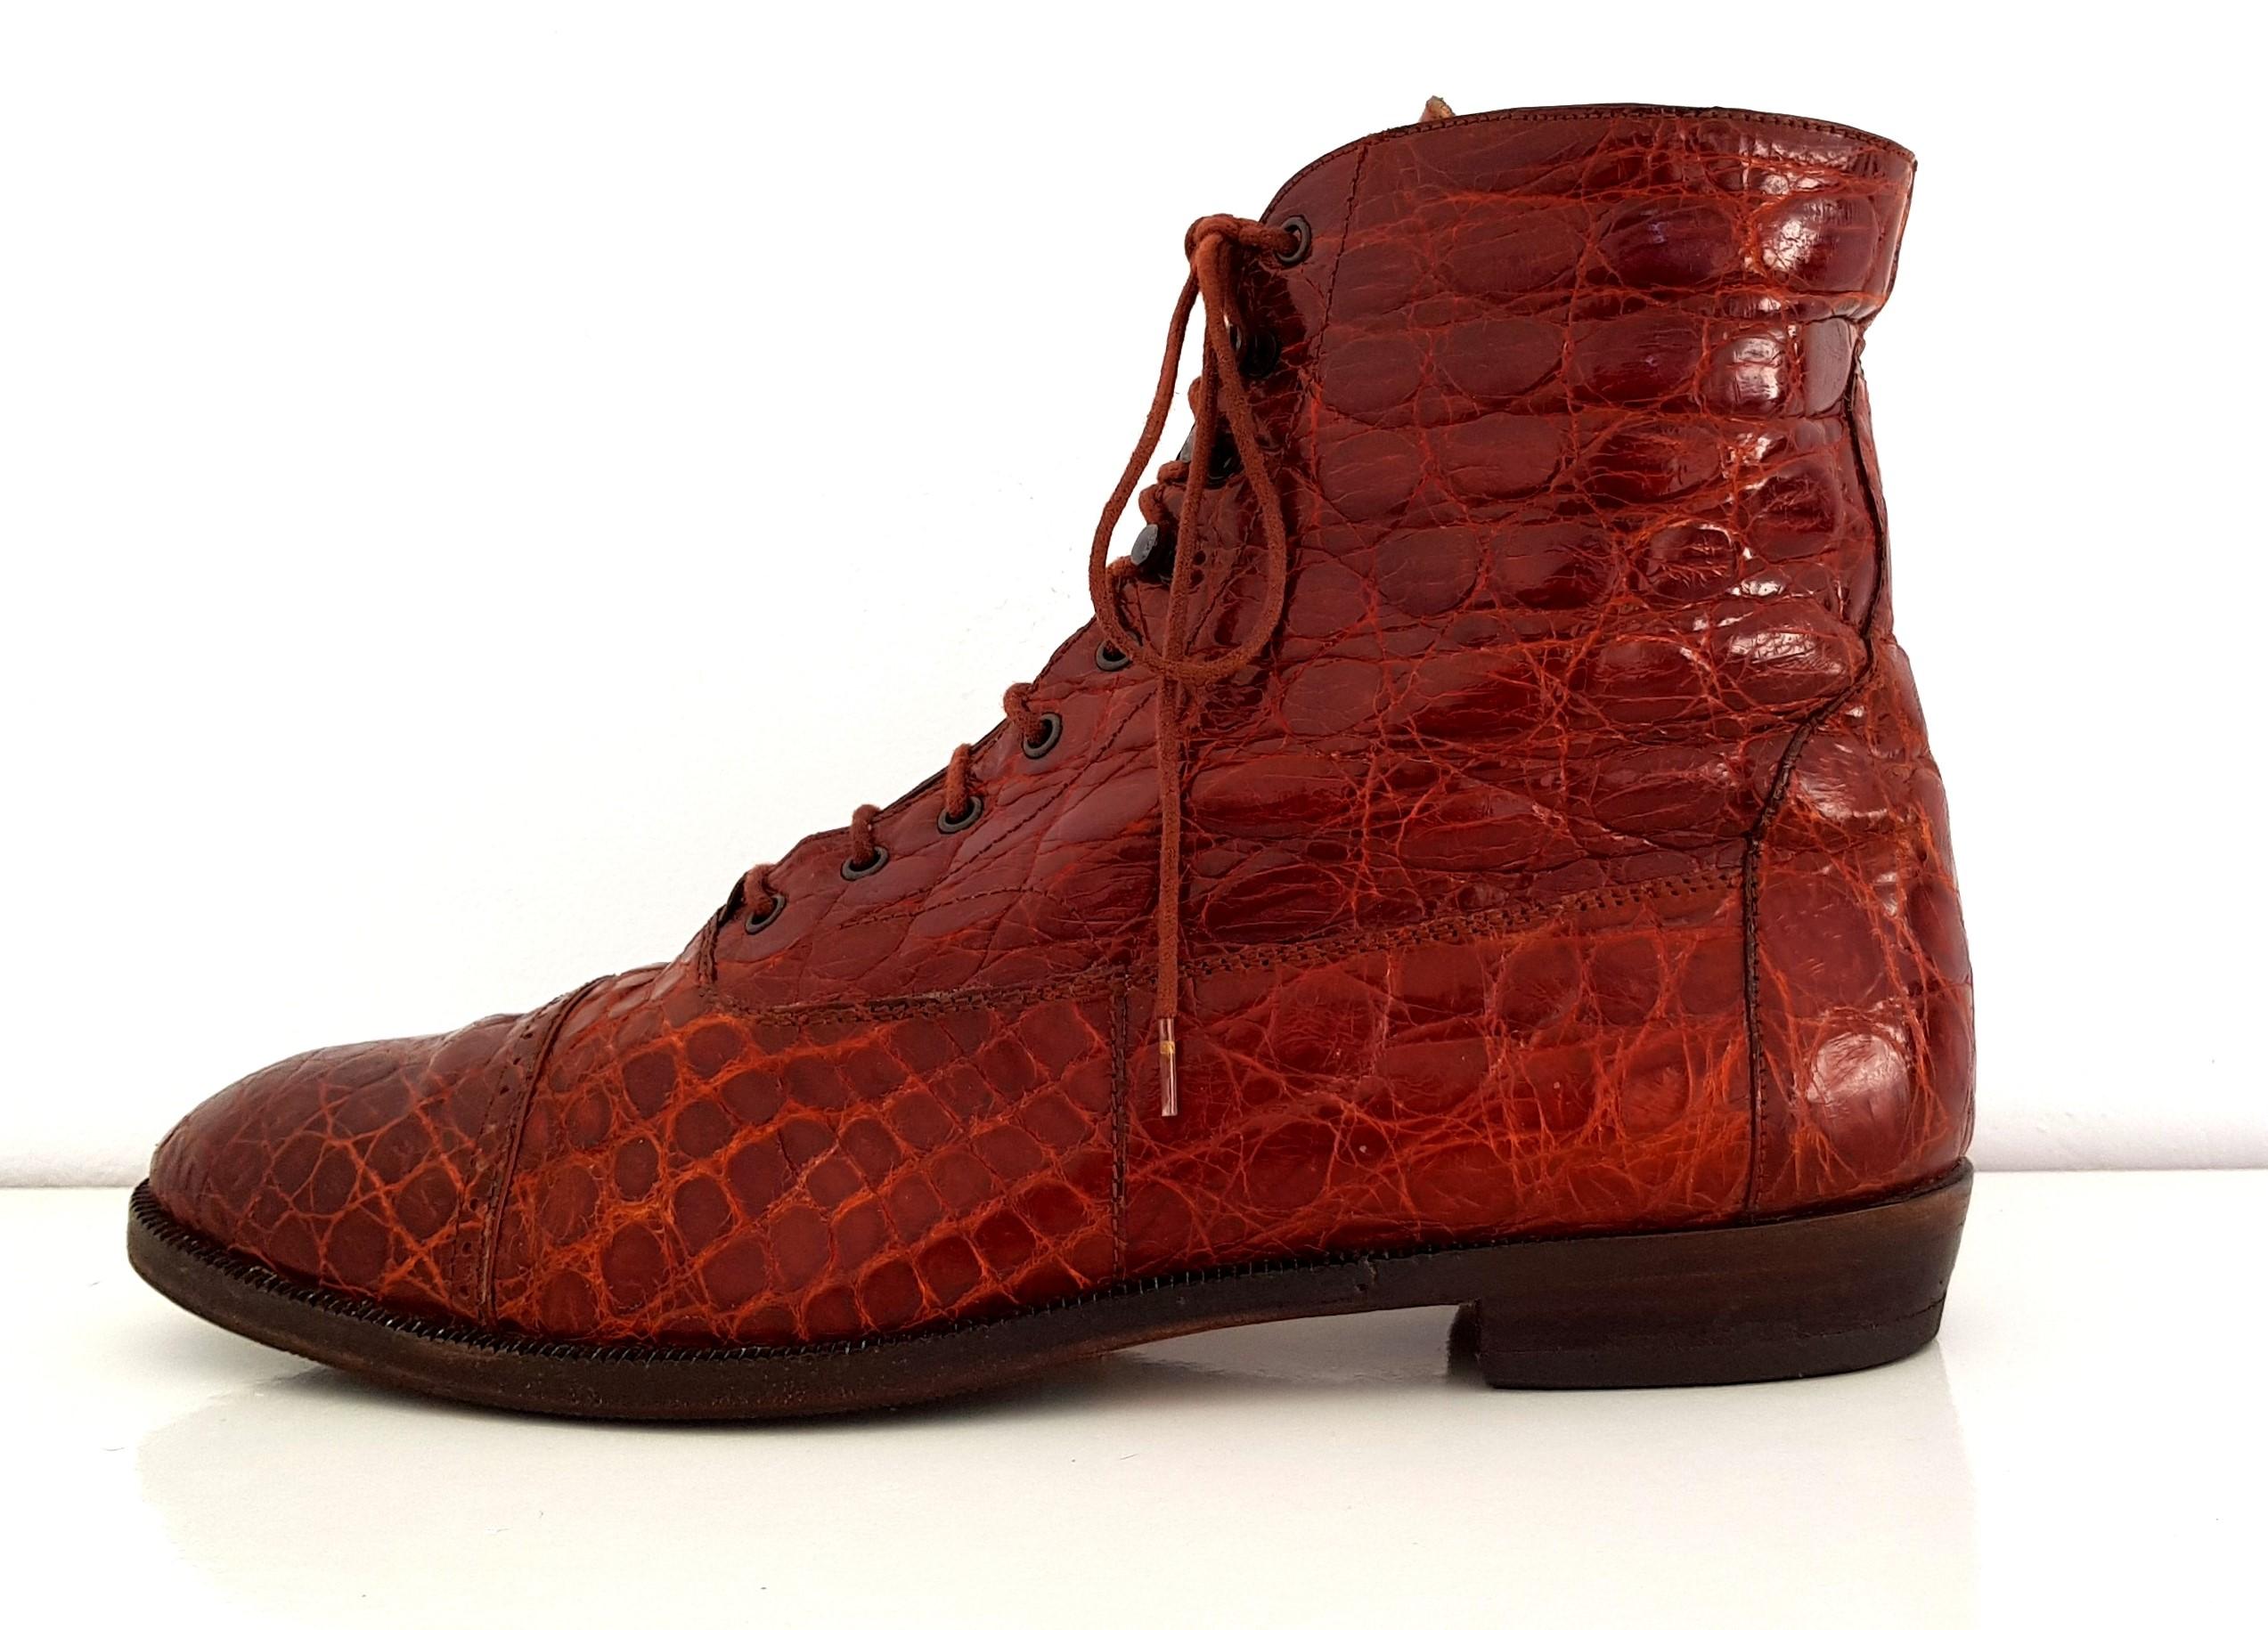 Ugo Rossetti Wild Crocodile Leather Boots with Laces. 
Color: Reddish Brown 
Heel height: 3 cm
Conditions: Never worn before (NEW)
Size 40 (EU)
Made in Italy